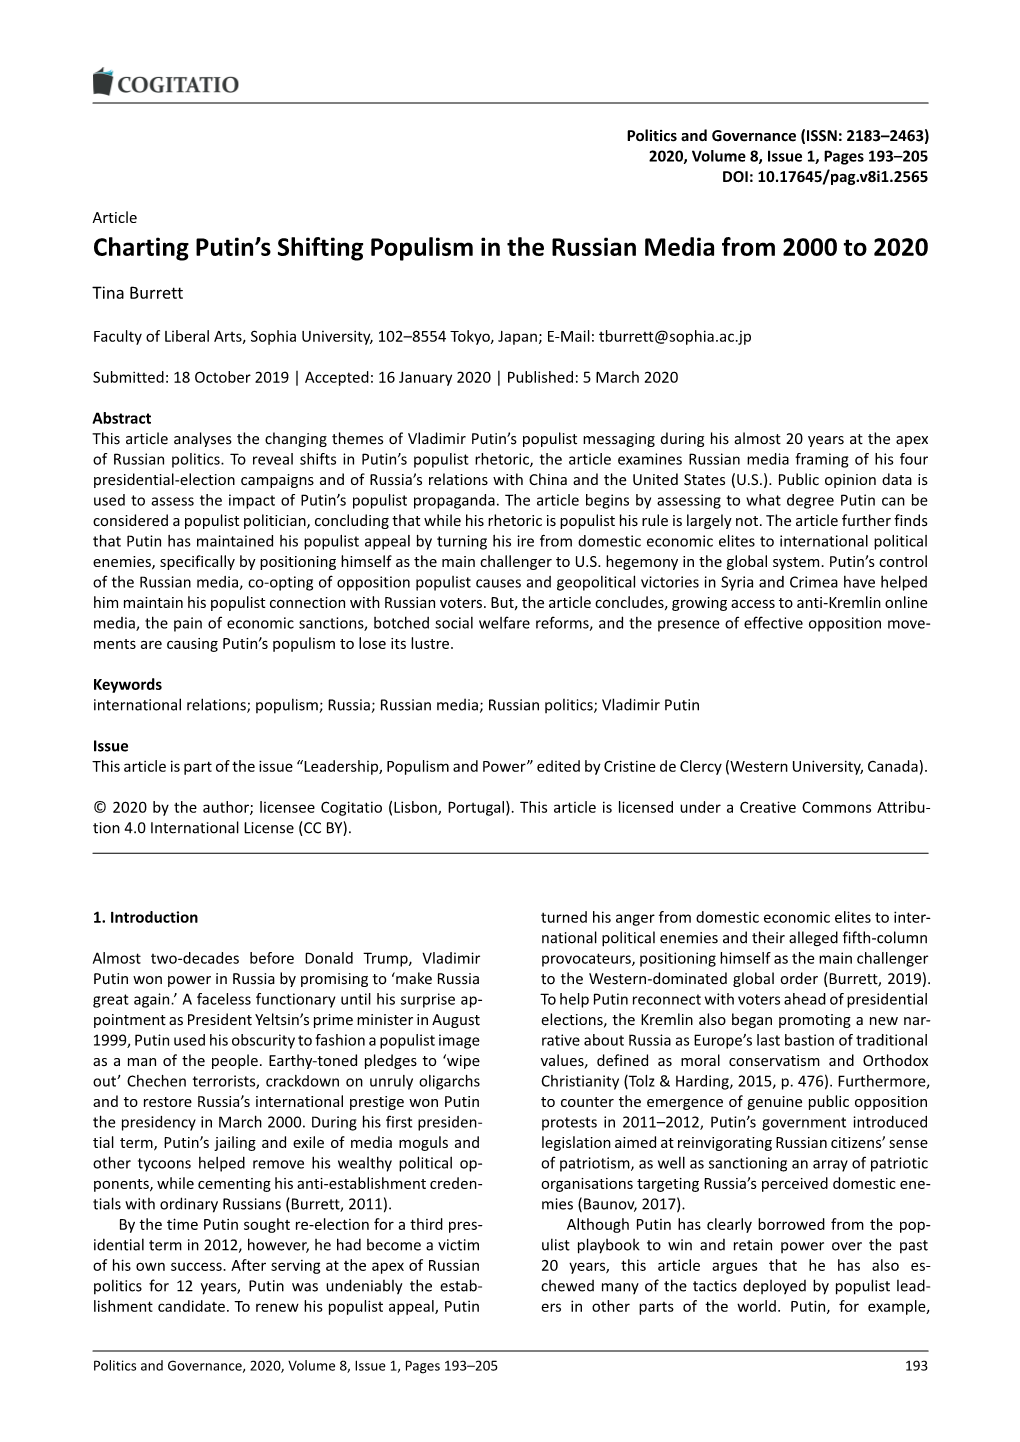 Charting Putin's Shifting Populism in the Russian Media from 2000 to 2020